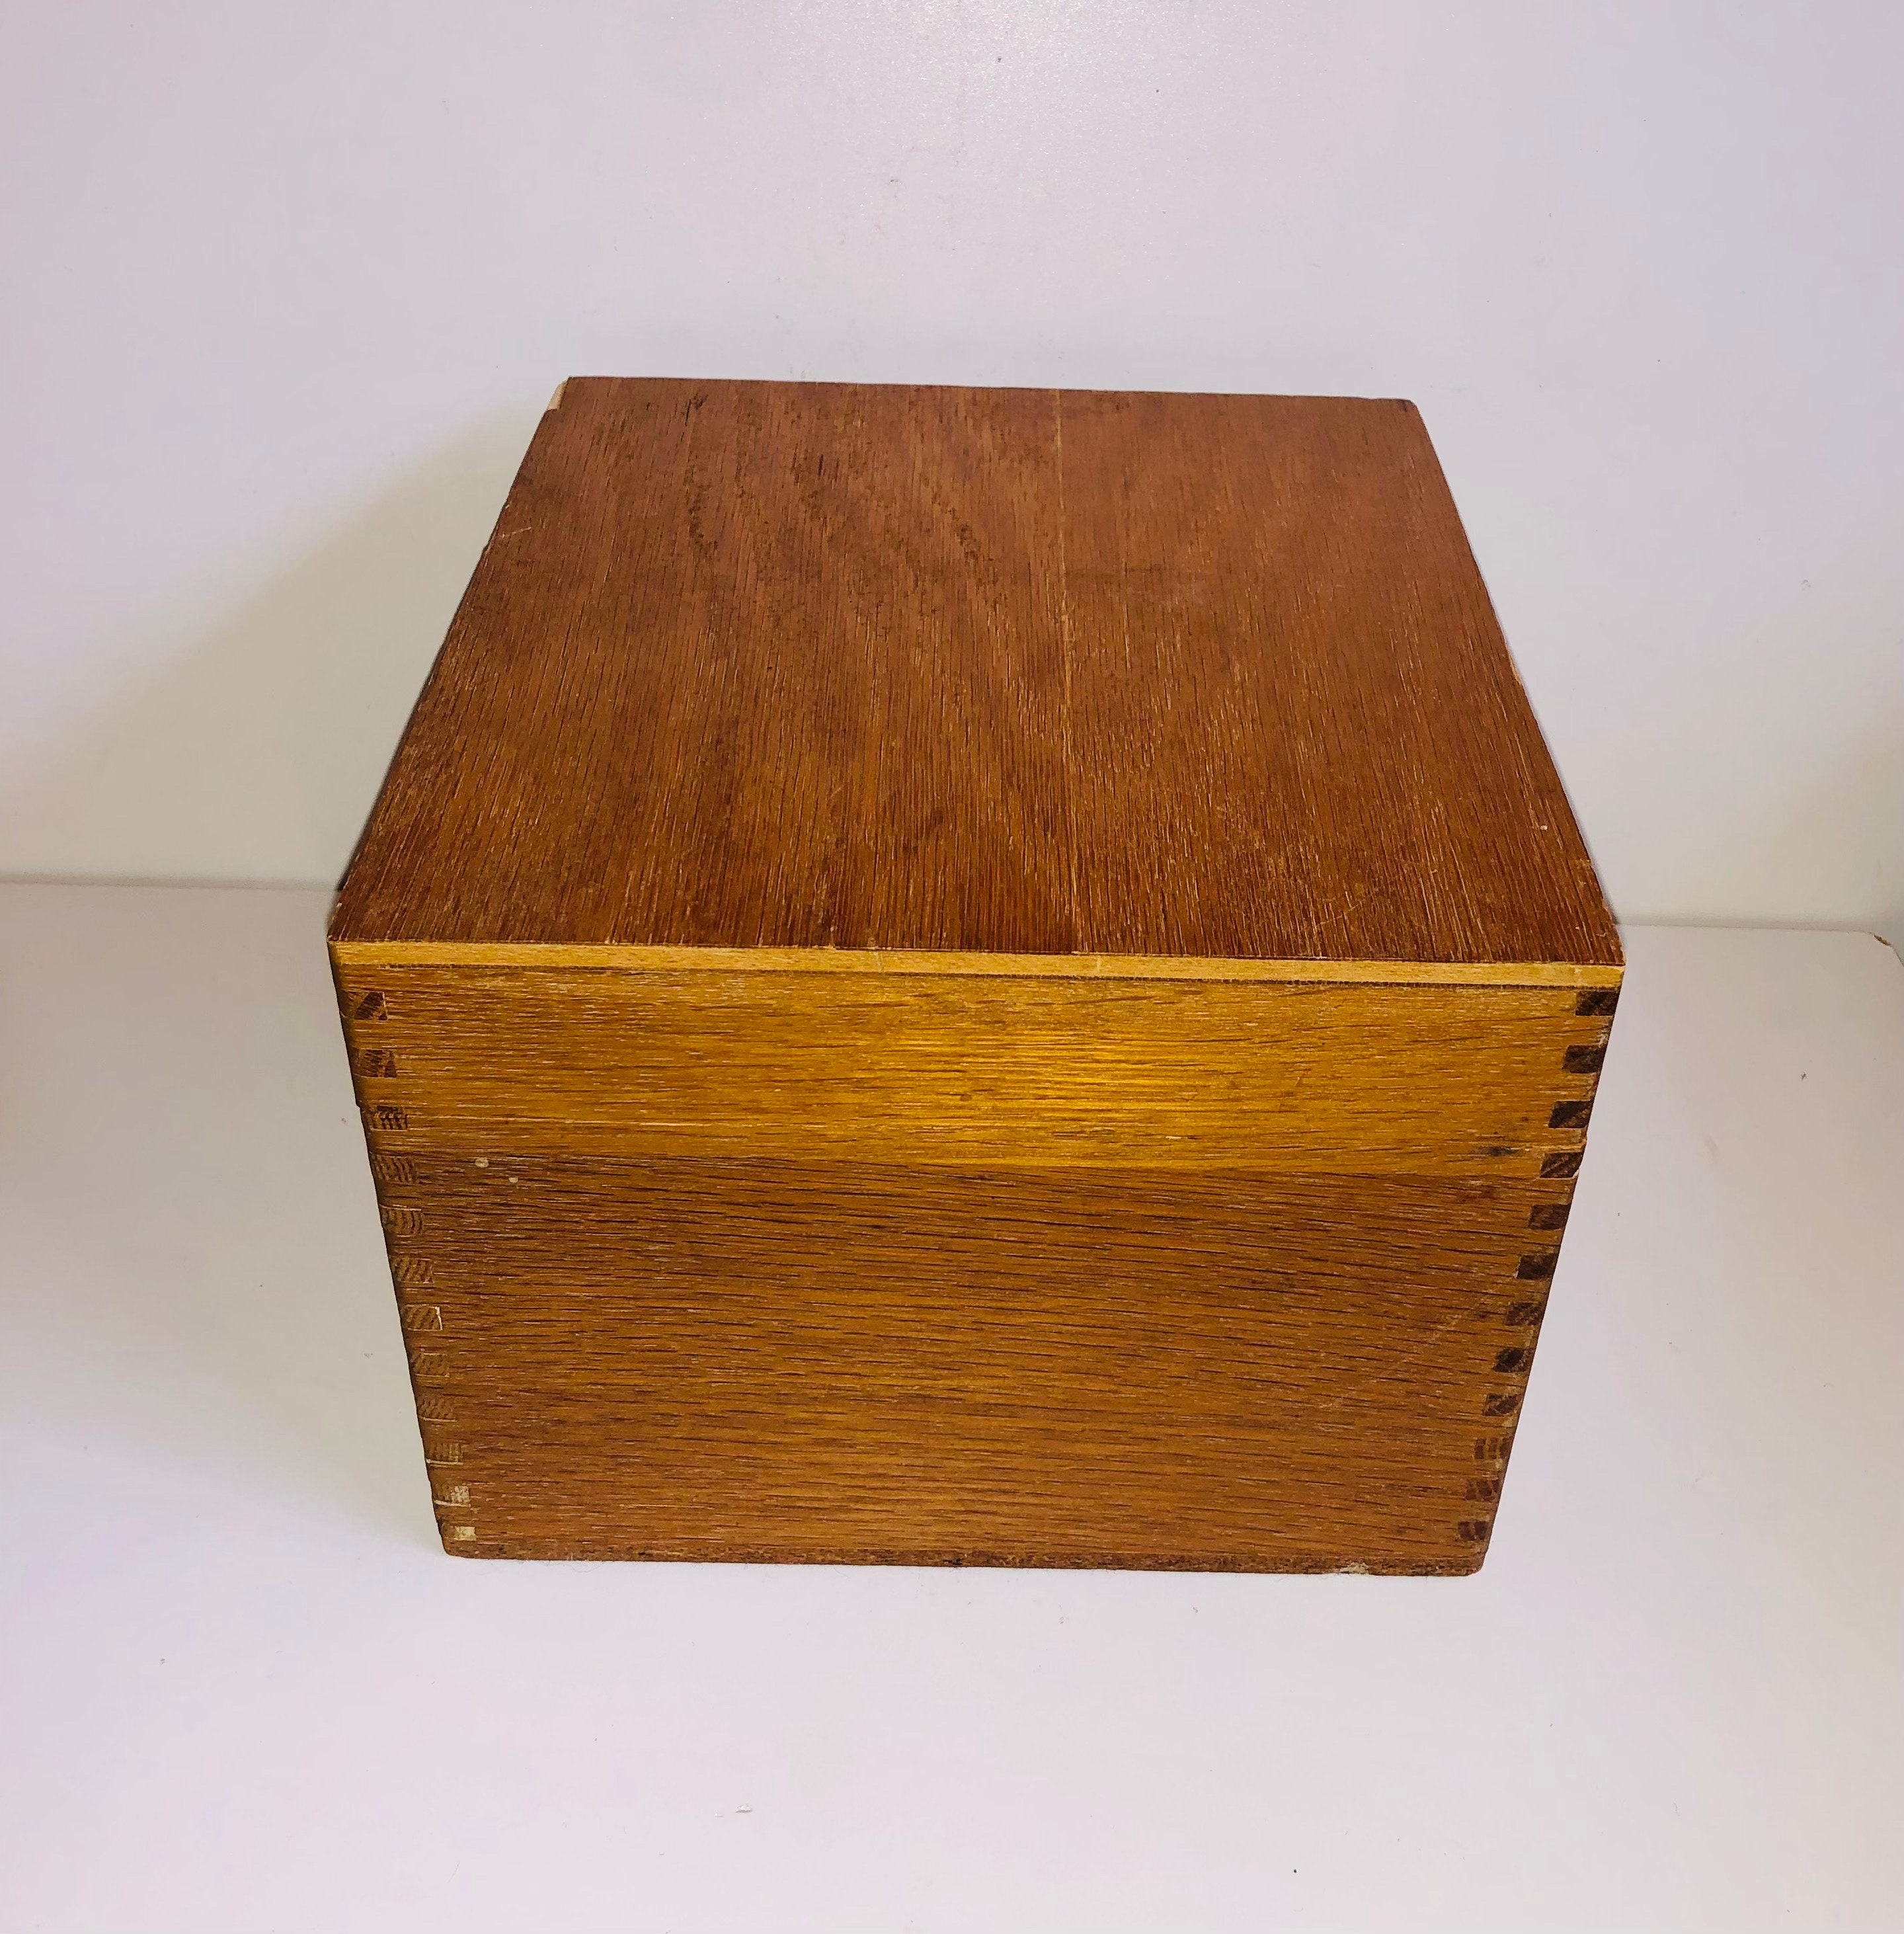 HAN 1005 Wooden Index Card Box for Maximum 1500 Cards A5 Landscape Format  255 x 190 x 380 mm